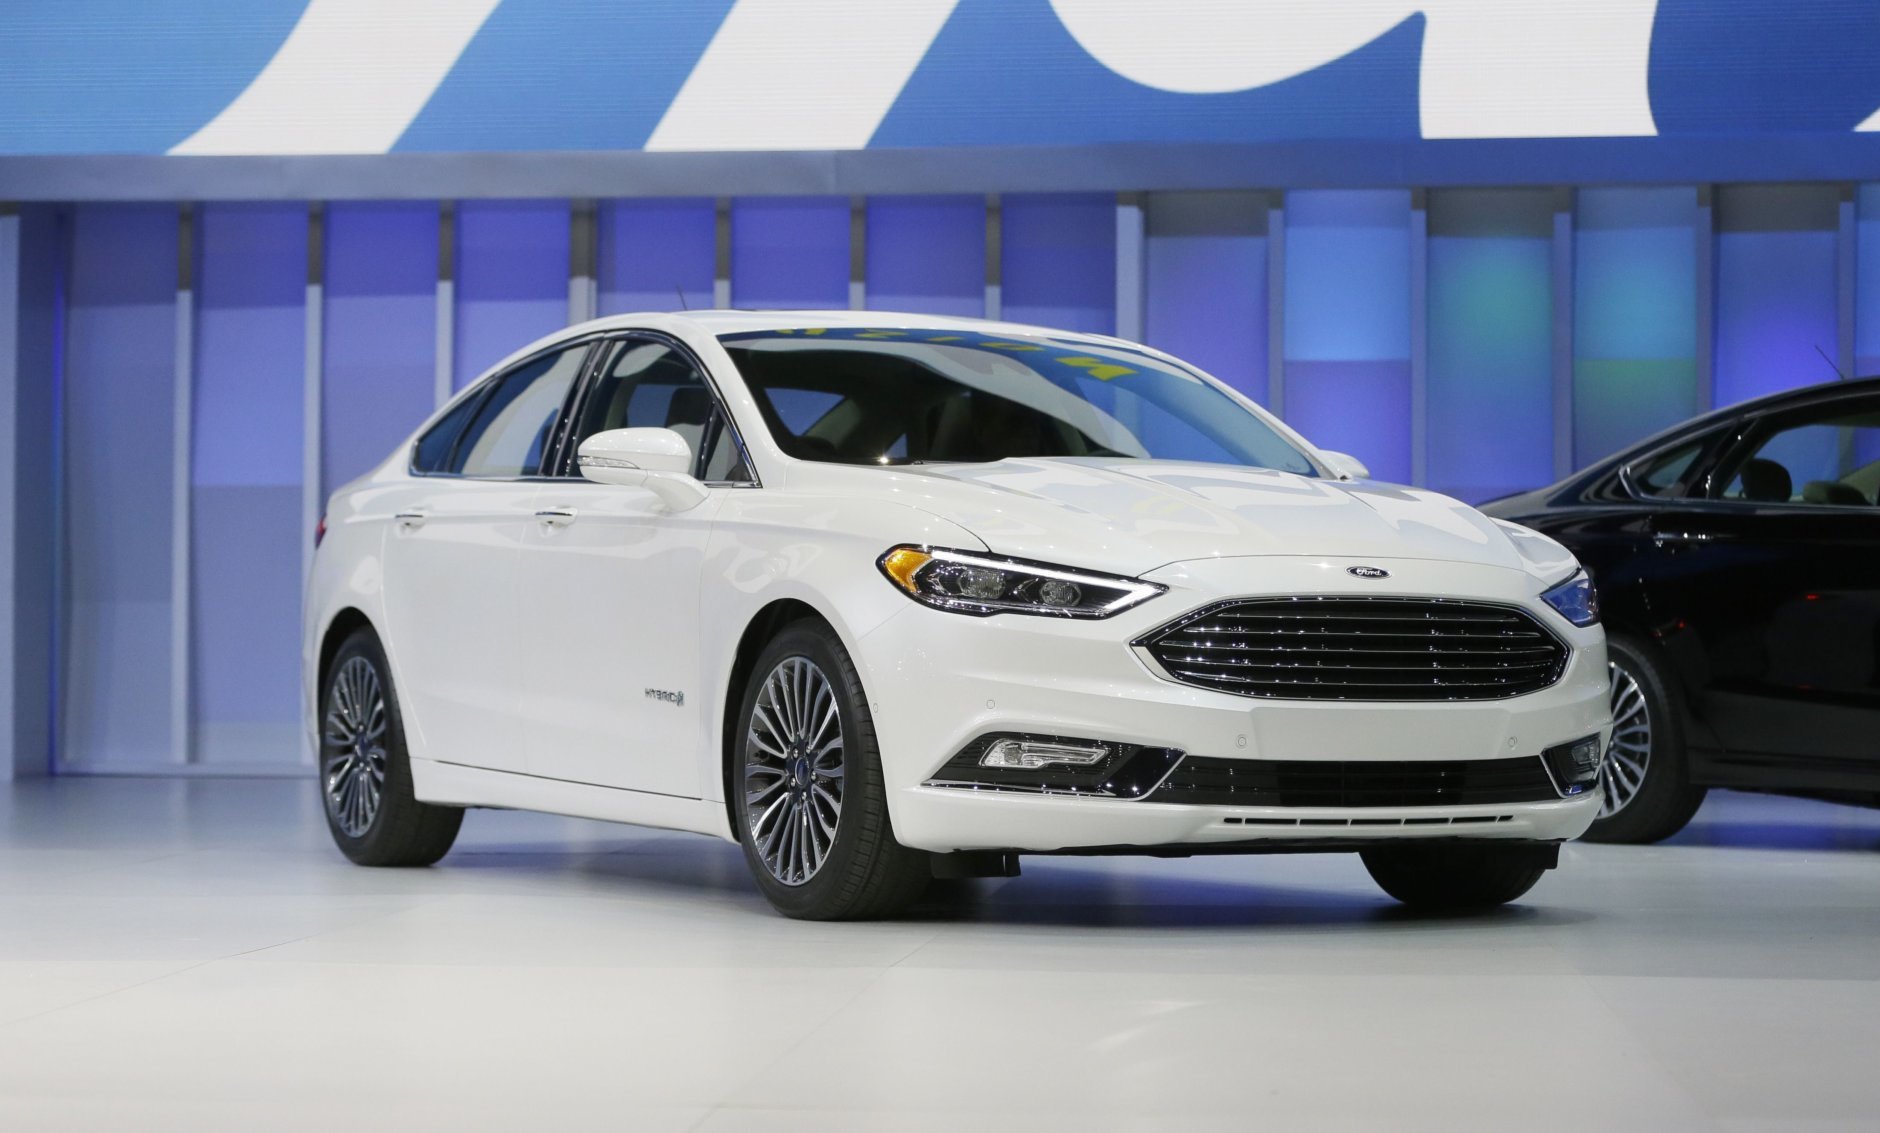 The 2017 Ford Fusion ranks No. 5 hottest models thieves want to get their hands on. The Ford Fusion hybrid is displayed at the North American International Auto Show, Monday, Jan. 11, 2016, in Detroit. (AP Photo/Carlos Osorio)